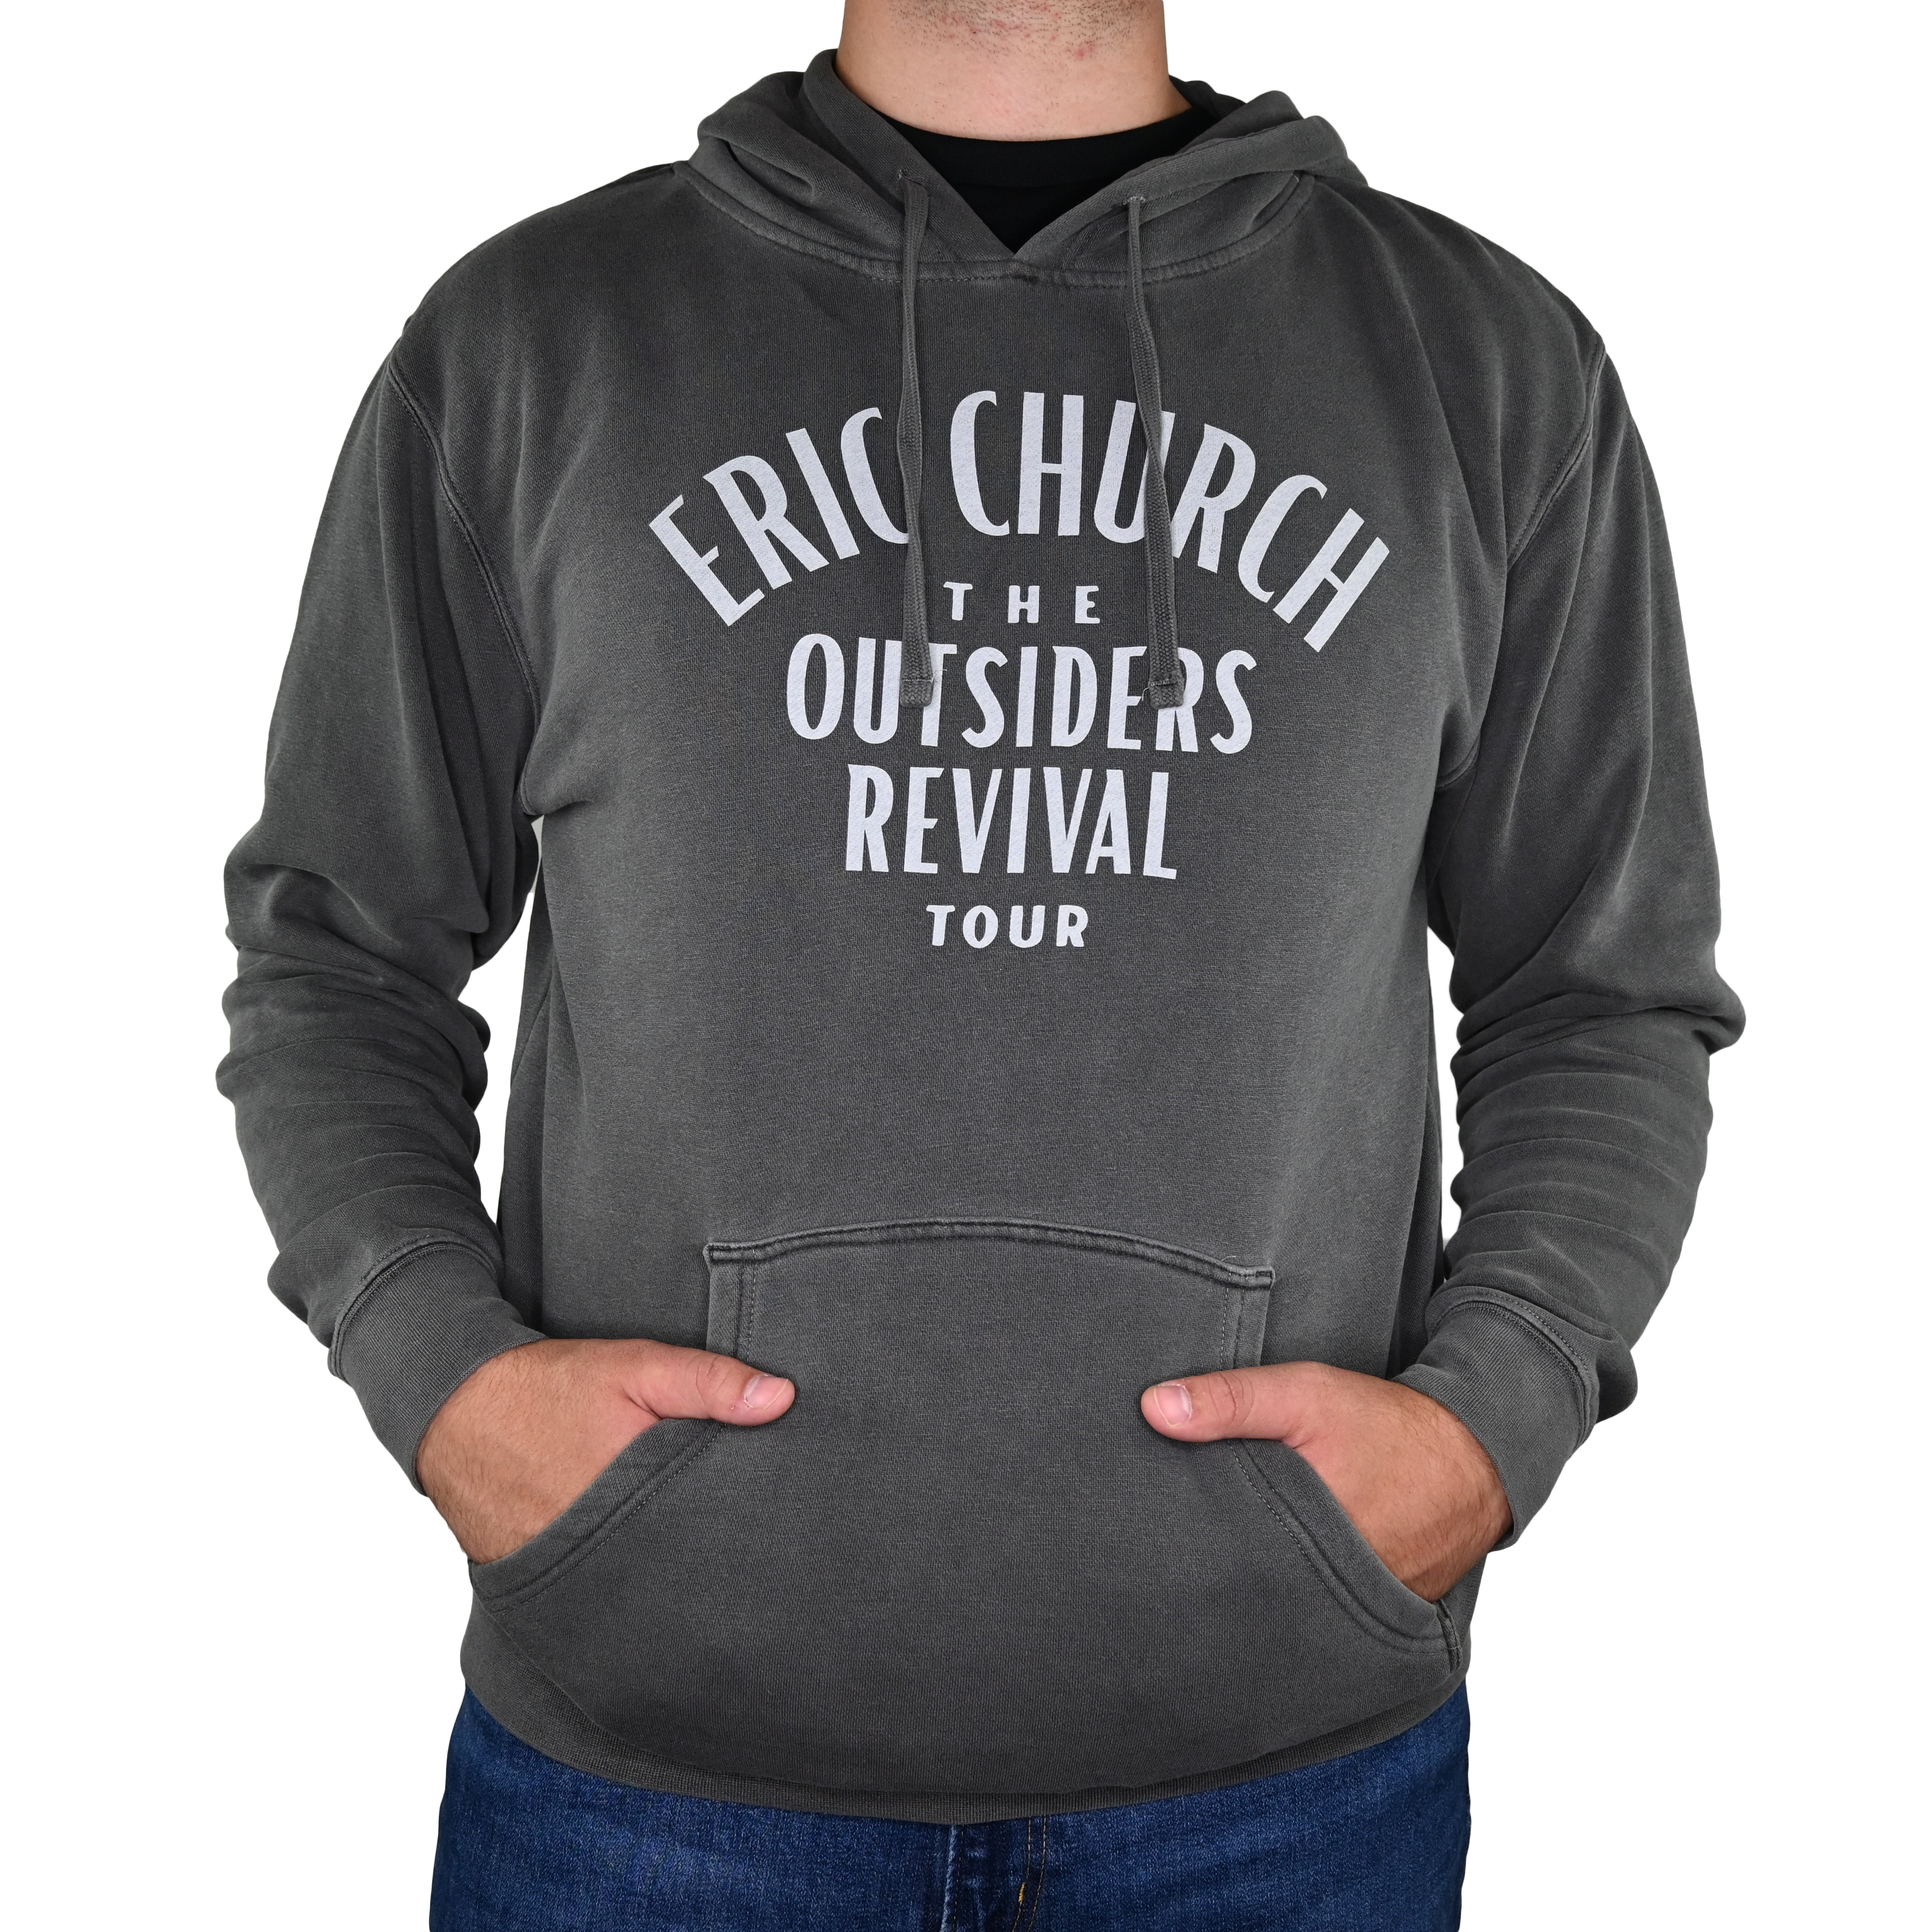 The Outsiders Revival Tour - Pullover Hoodie